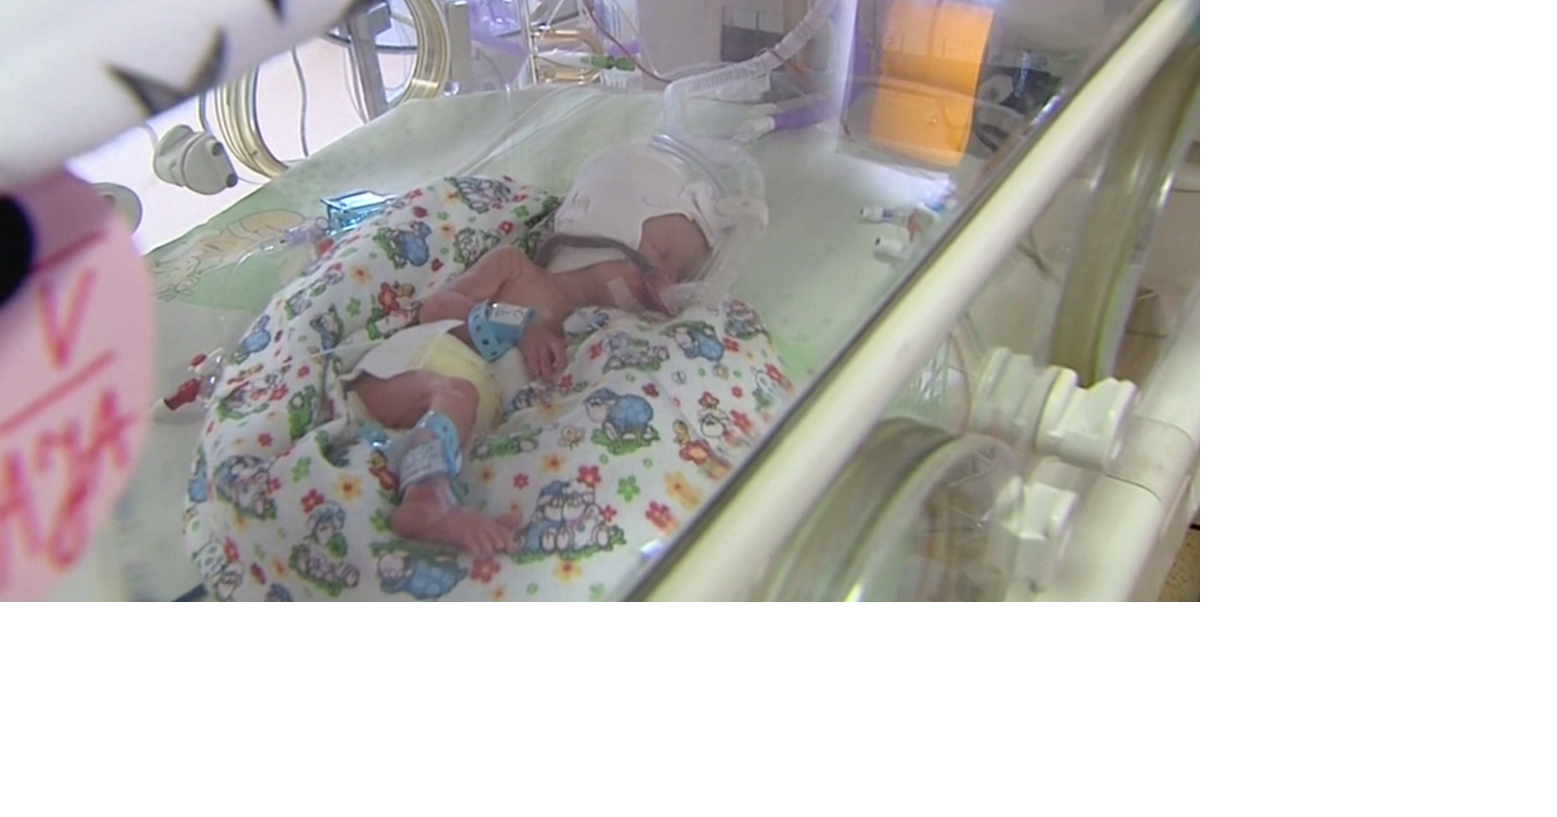 Woman Gives Birth To Polands First Sextuplets Billings News